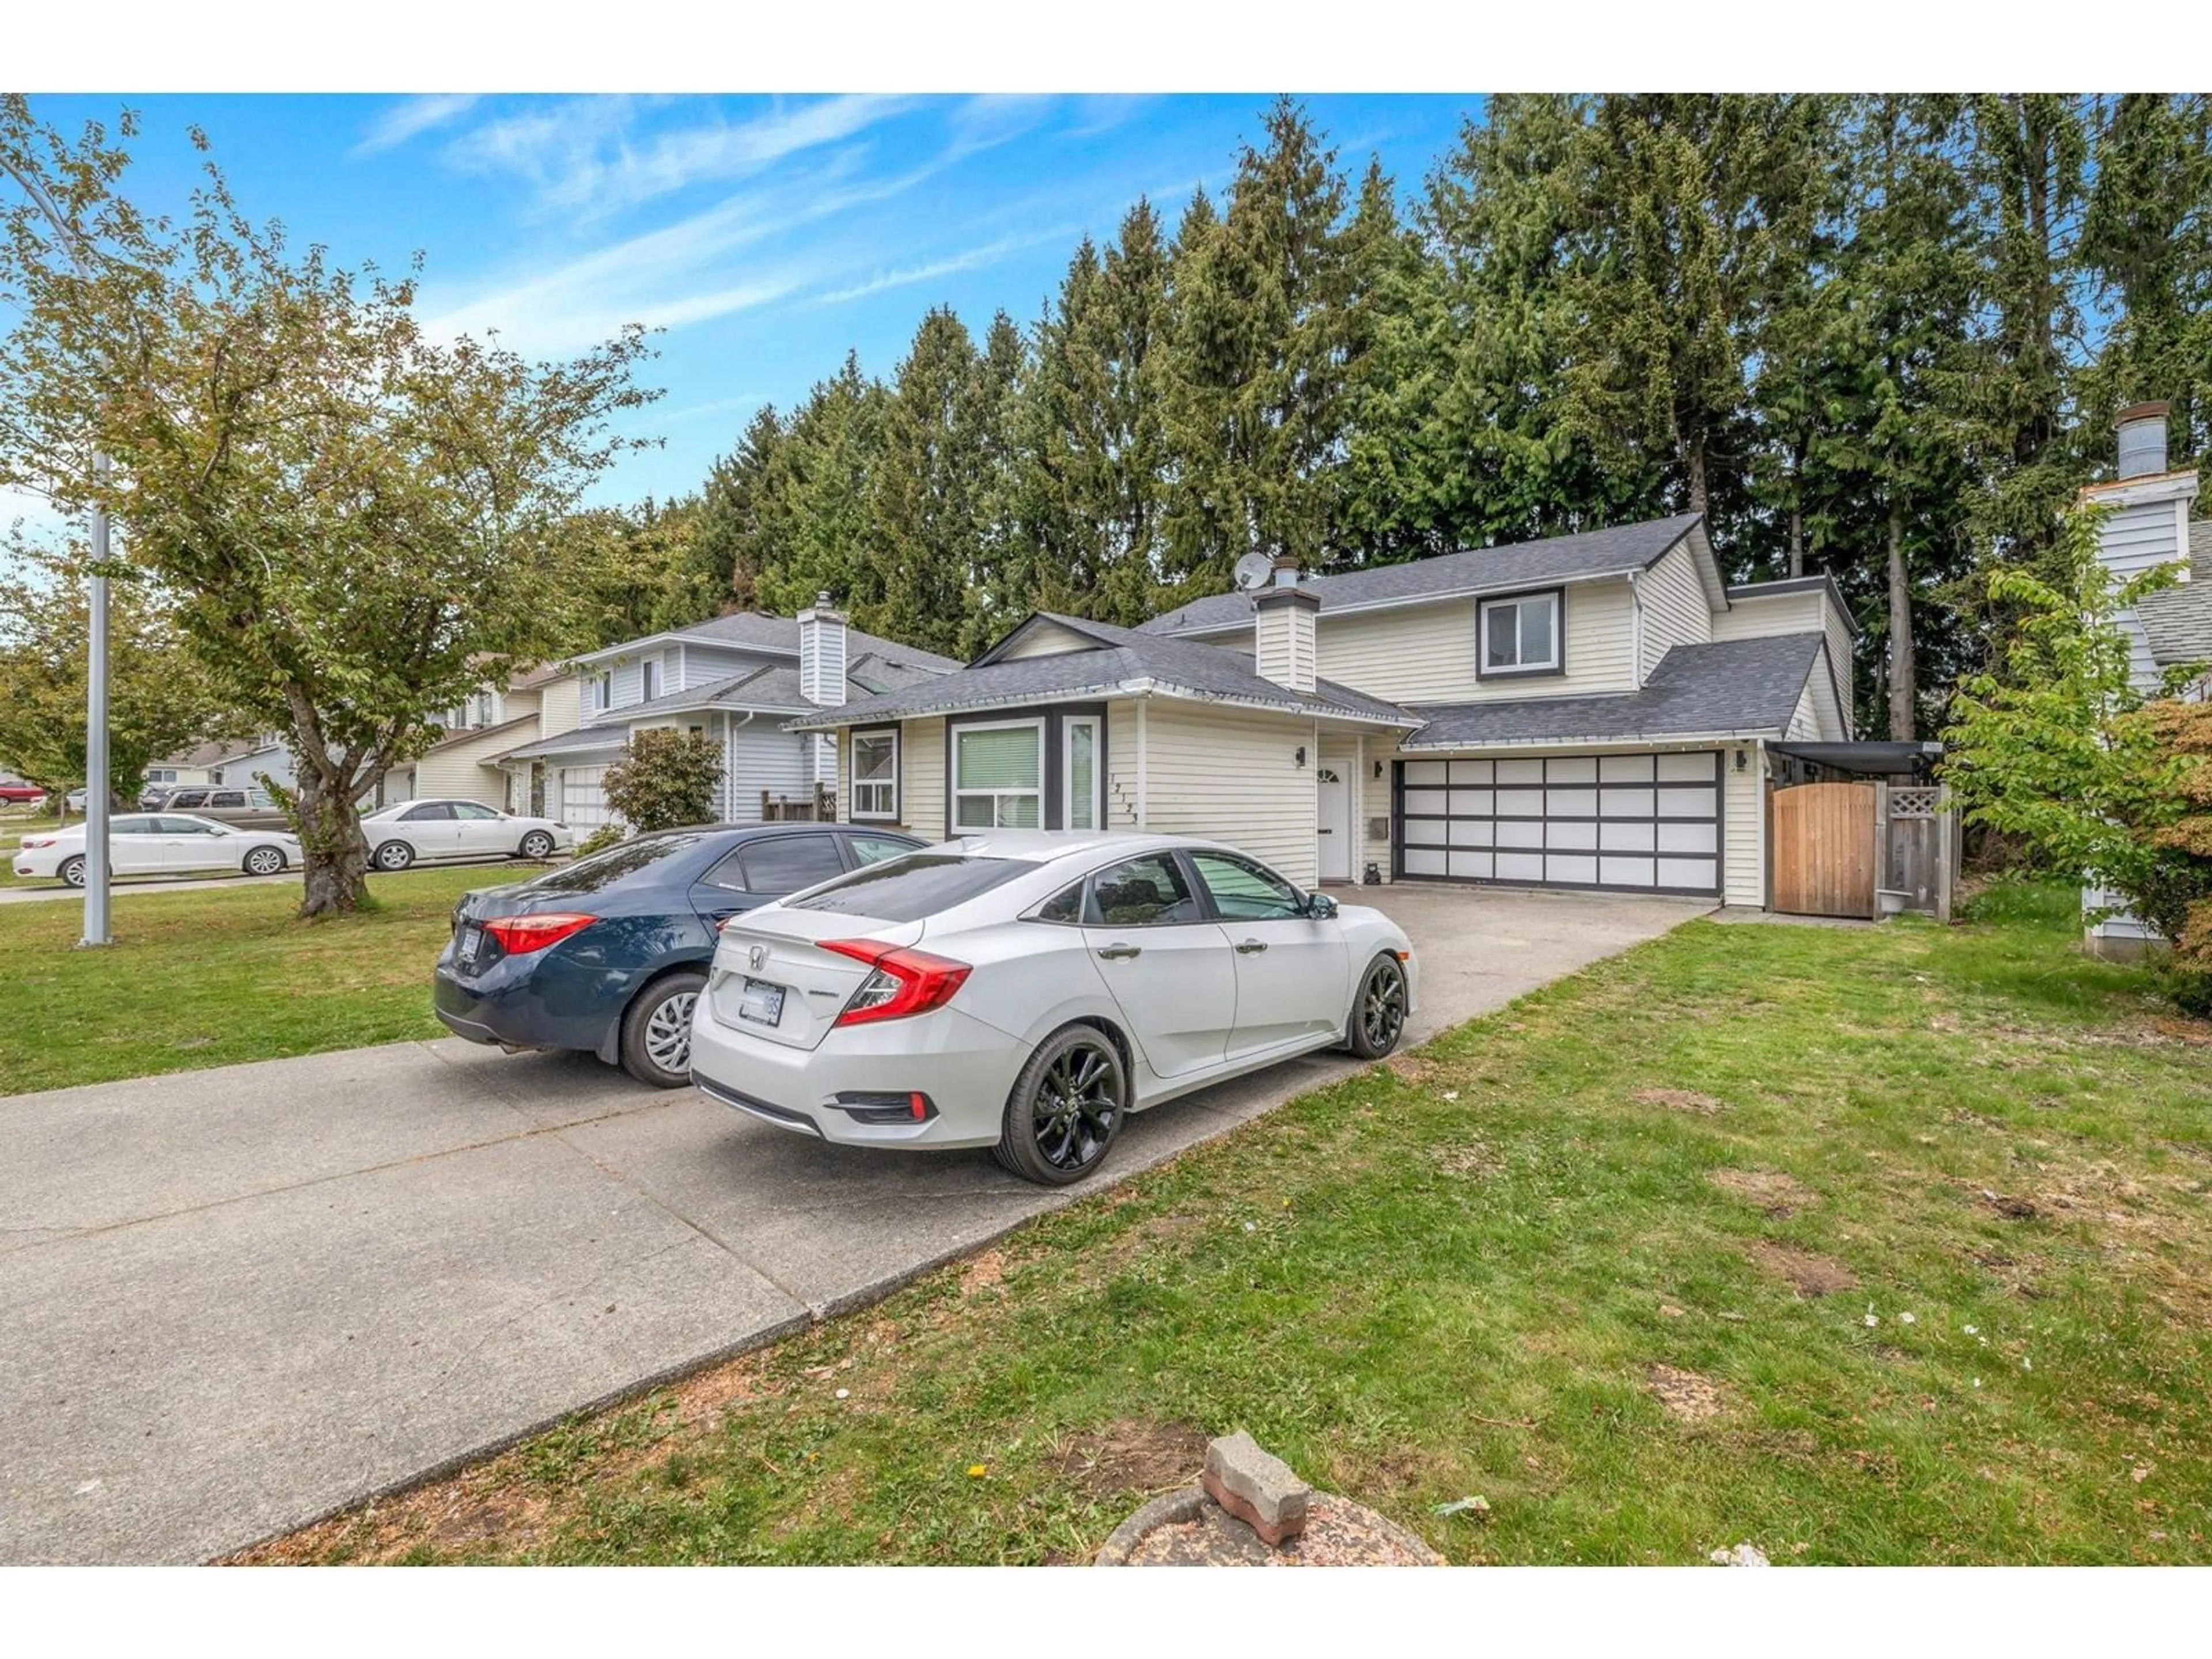 Frontside or backside of a home for 12123 85A AVENUE, Surrey British Columbia V3W9R1